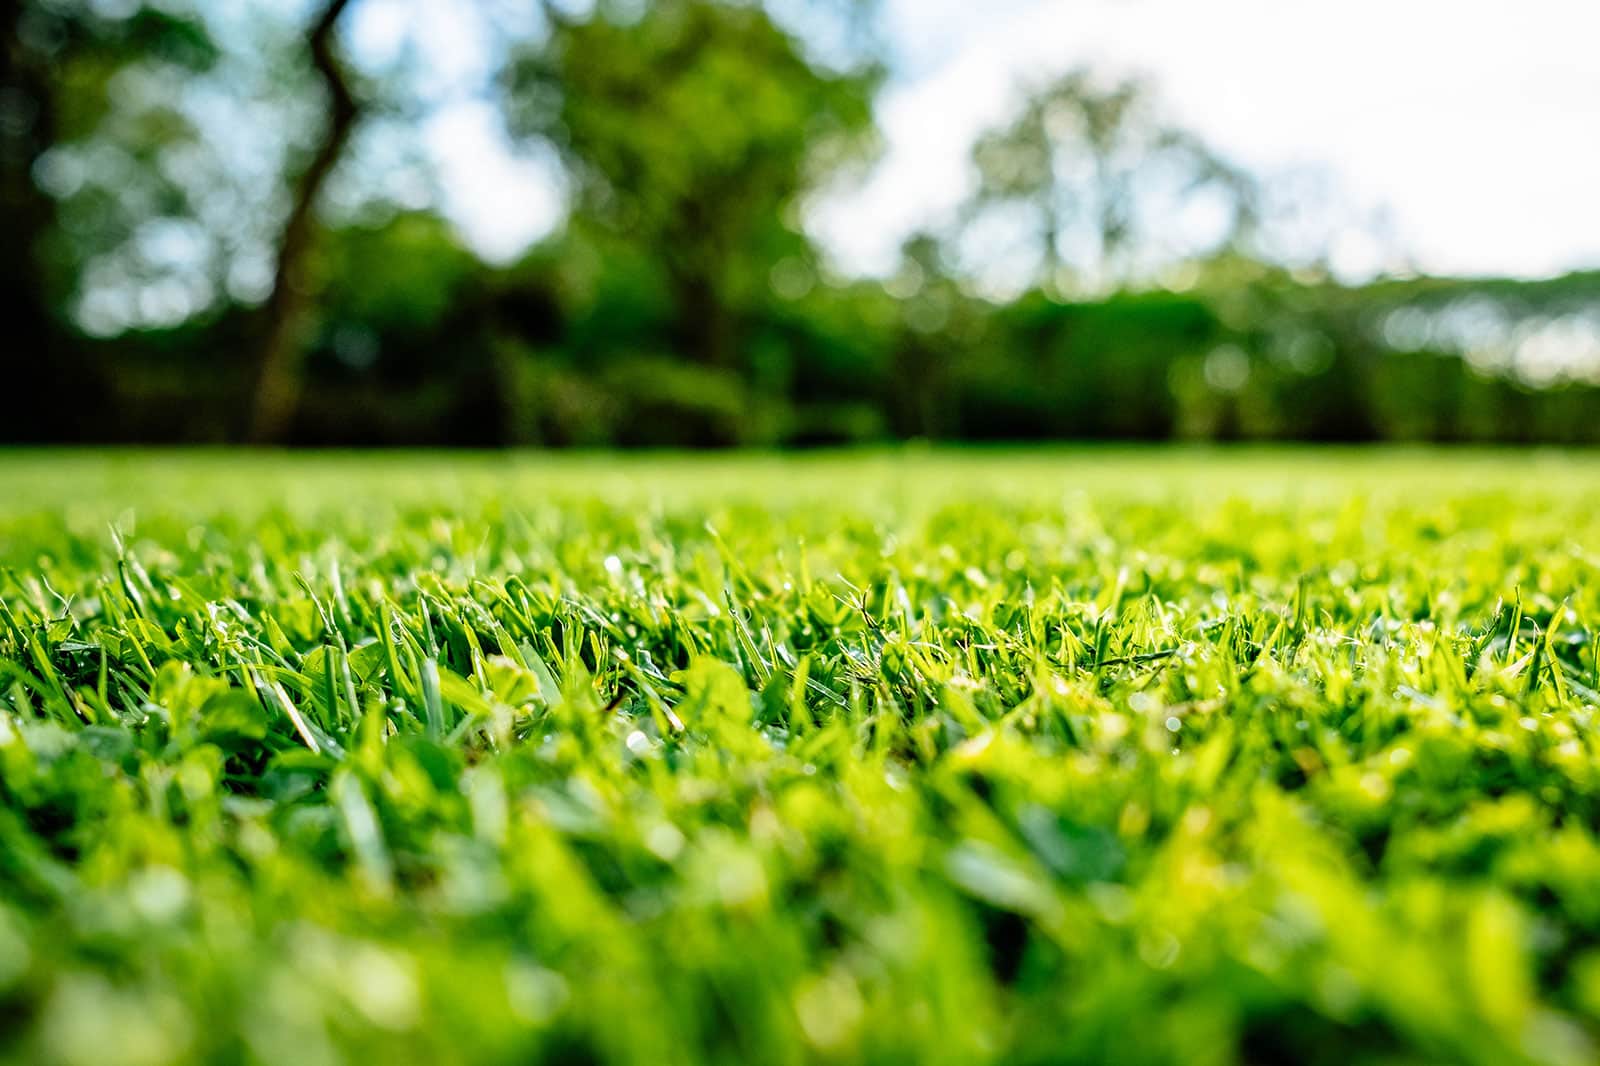 Close-up of grass blades on a lawn